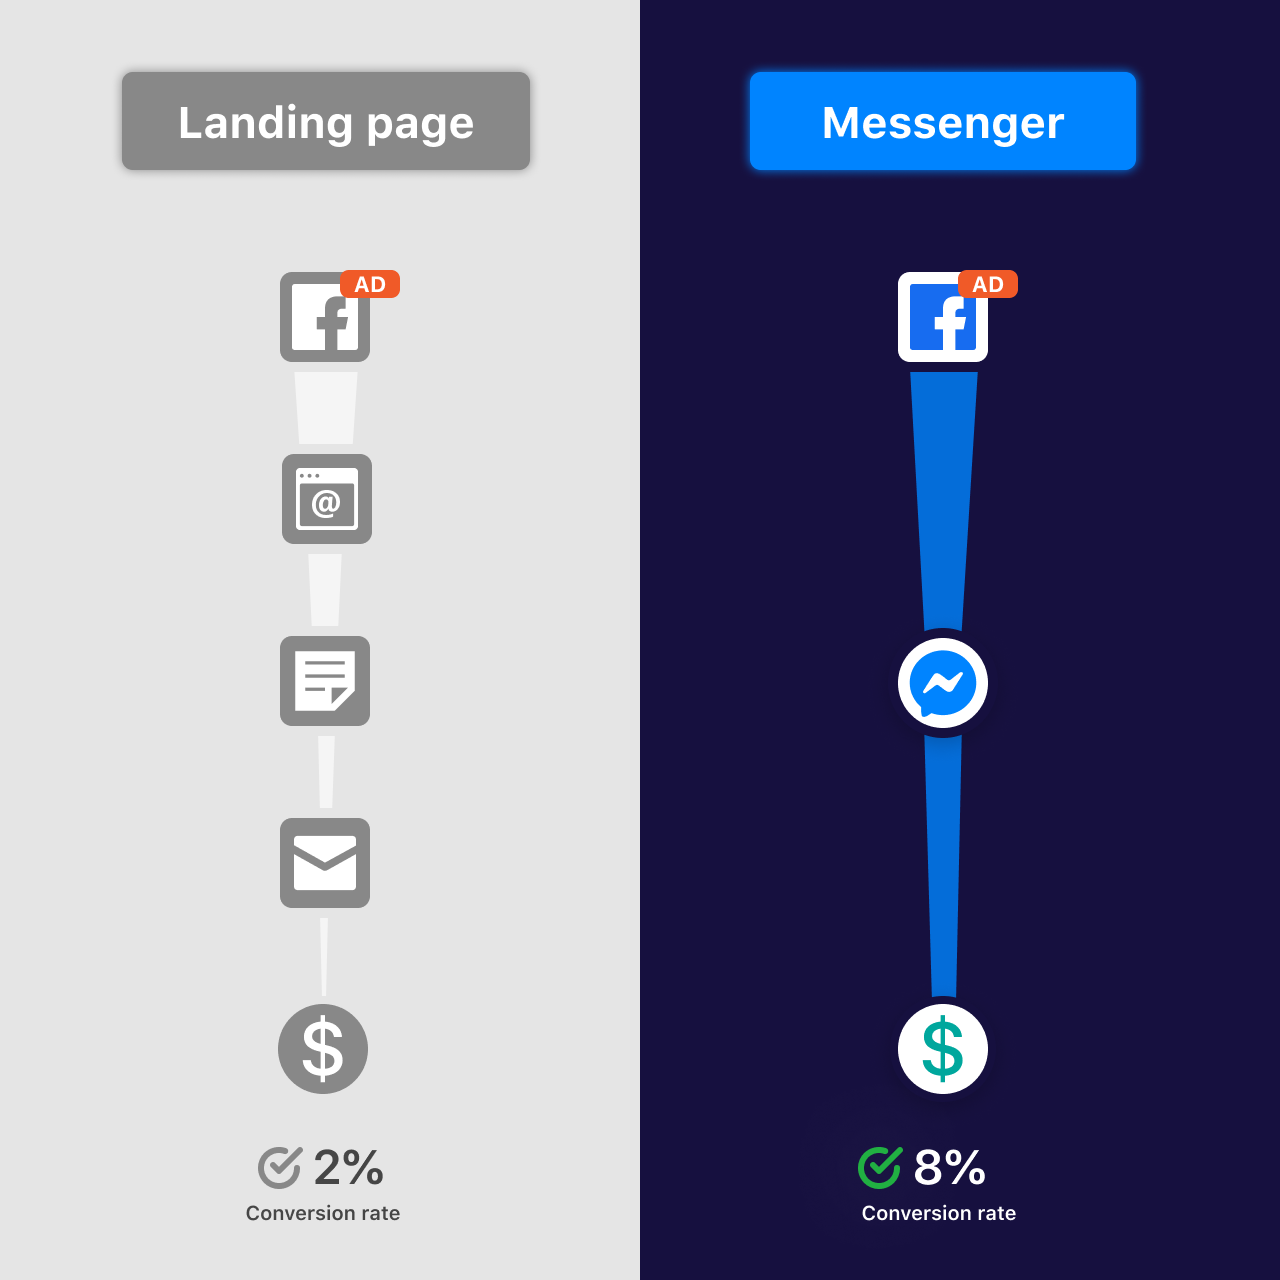 Traditional-landing-page-vs-Messenger-conversion-rates